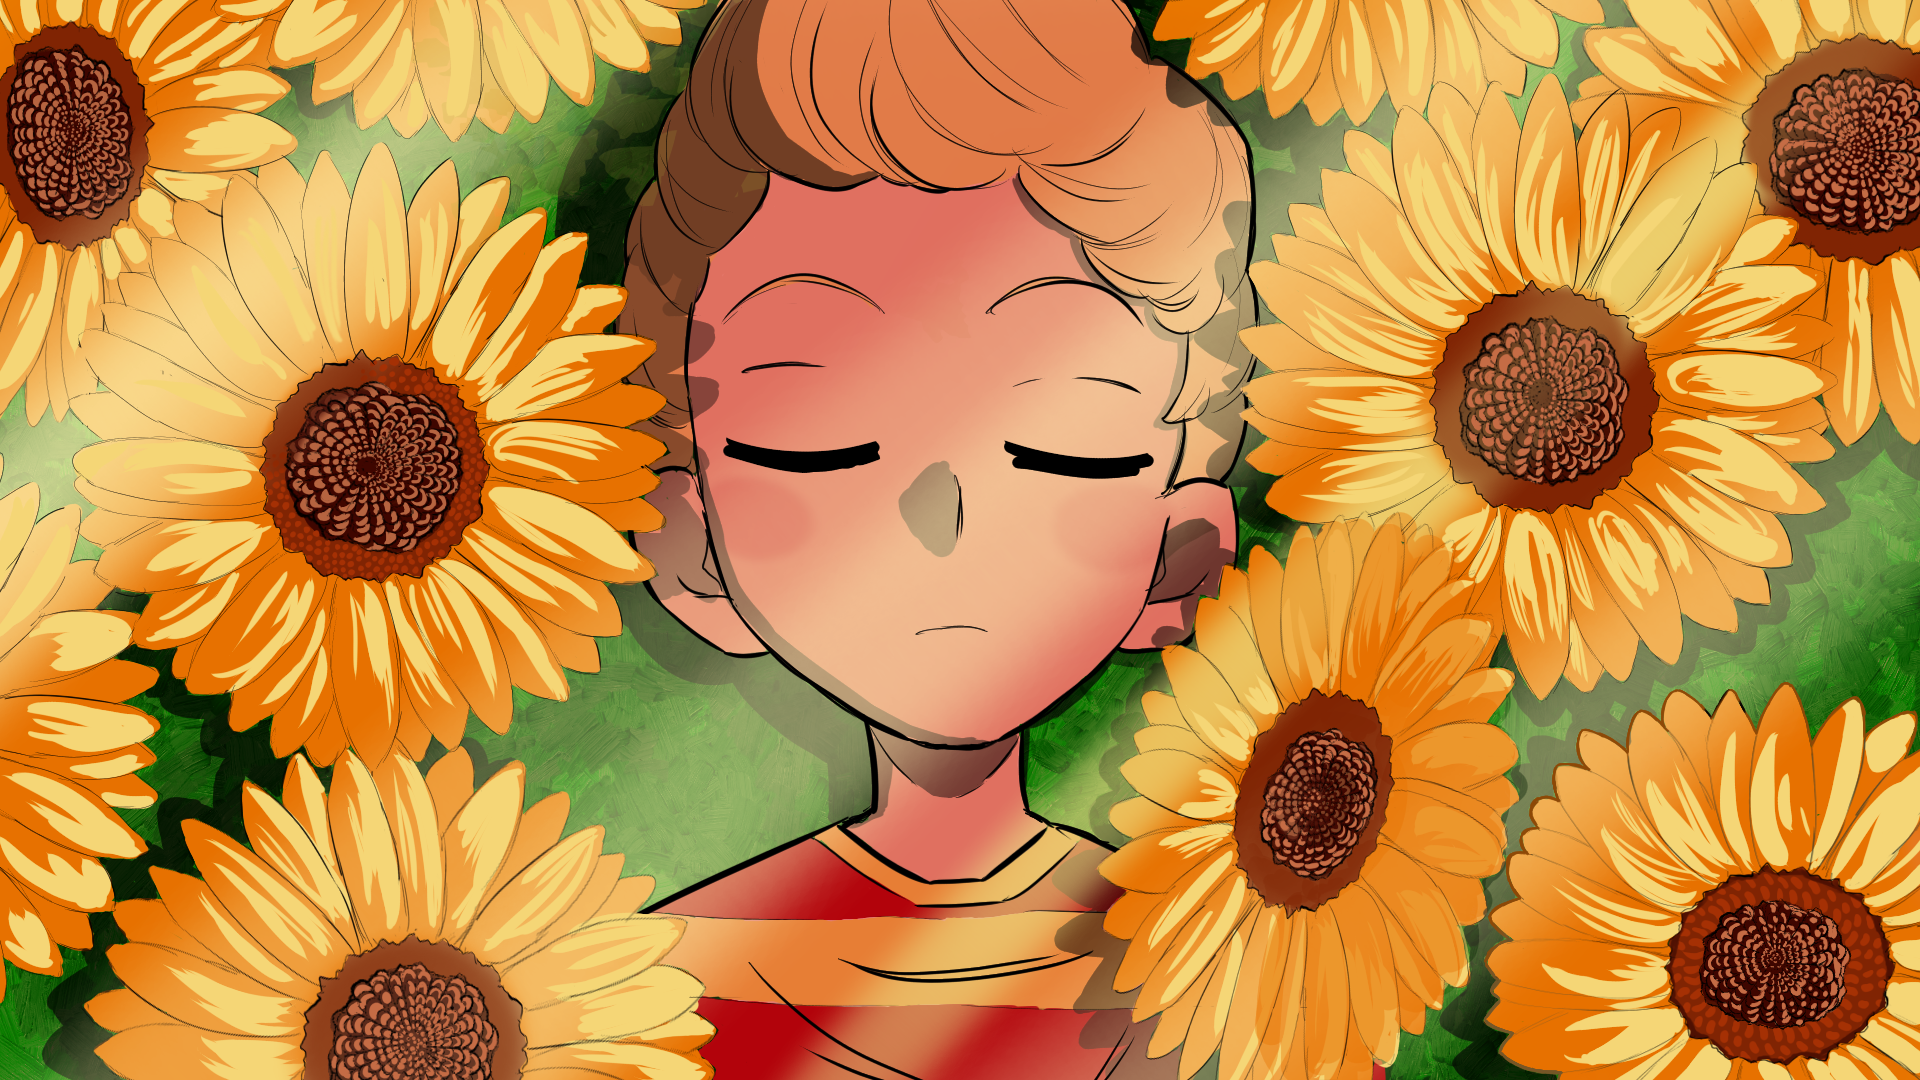 Lucas Sunflowers By Milamilamila 6157